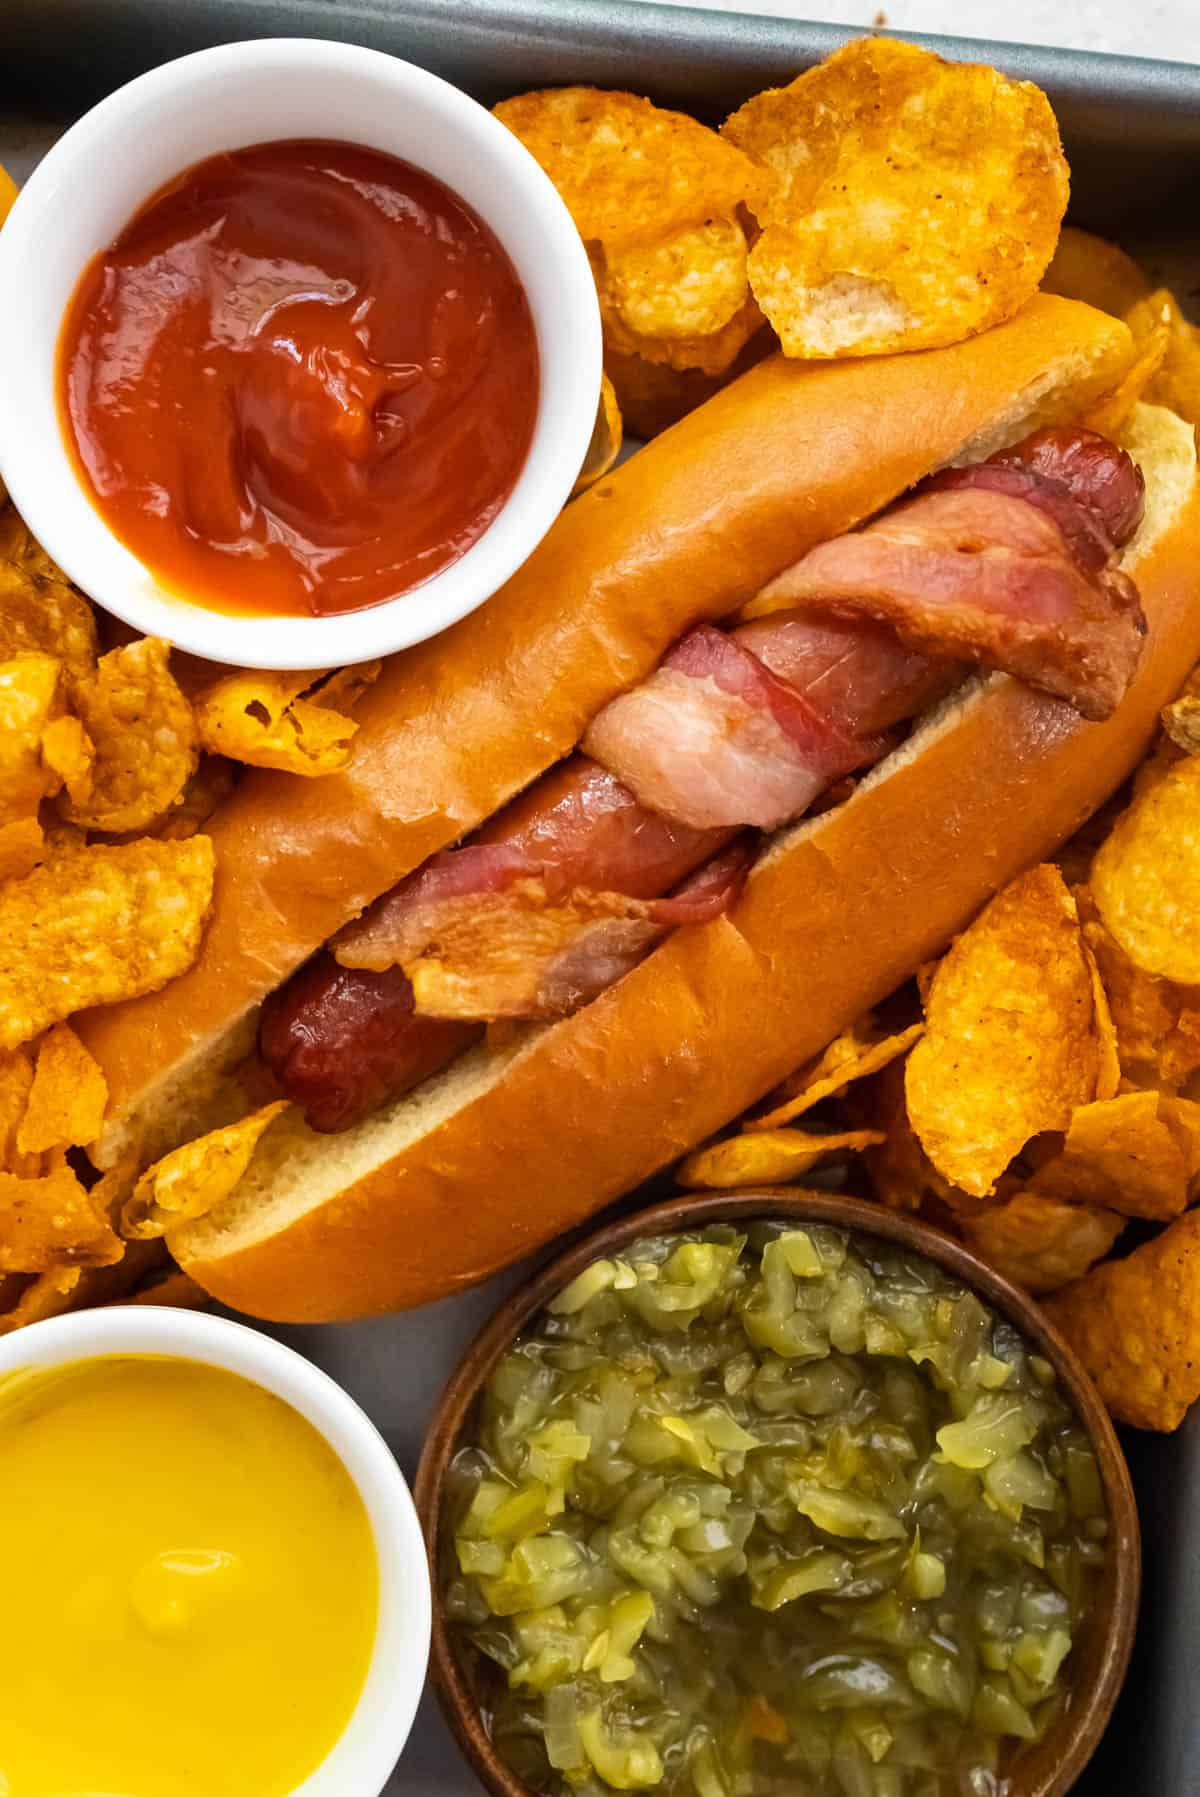 A bacon wrapped hot dog in a bun surrounded by barbecue potato chips, and small bowls of ketchup, yellow mustard, and relish.